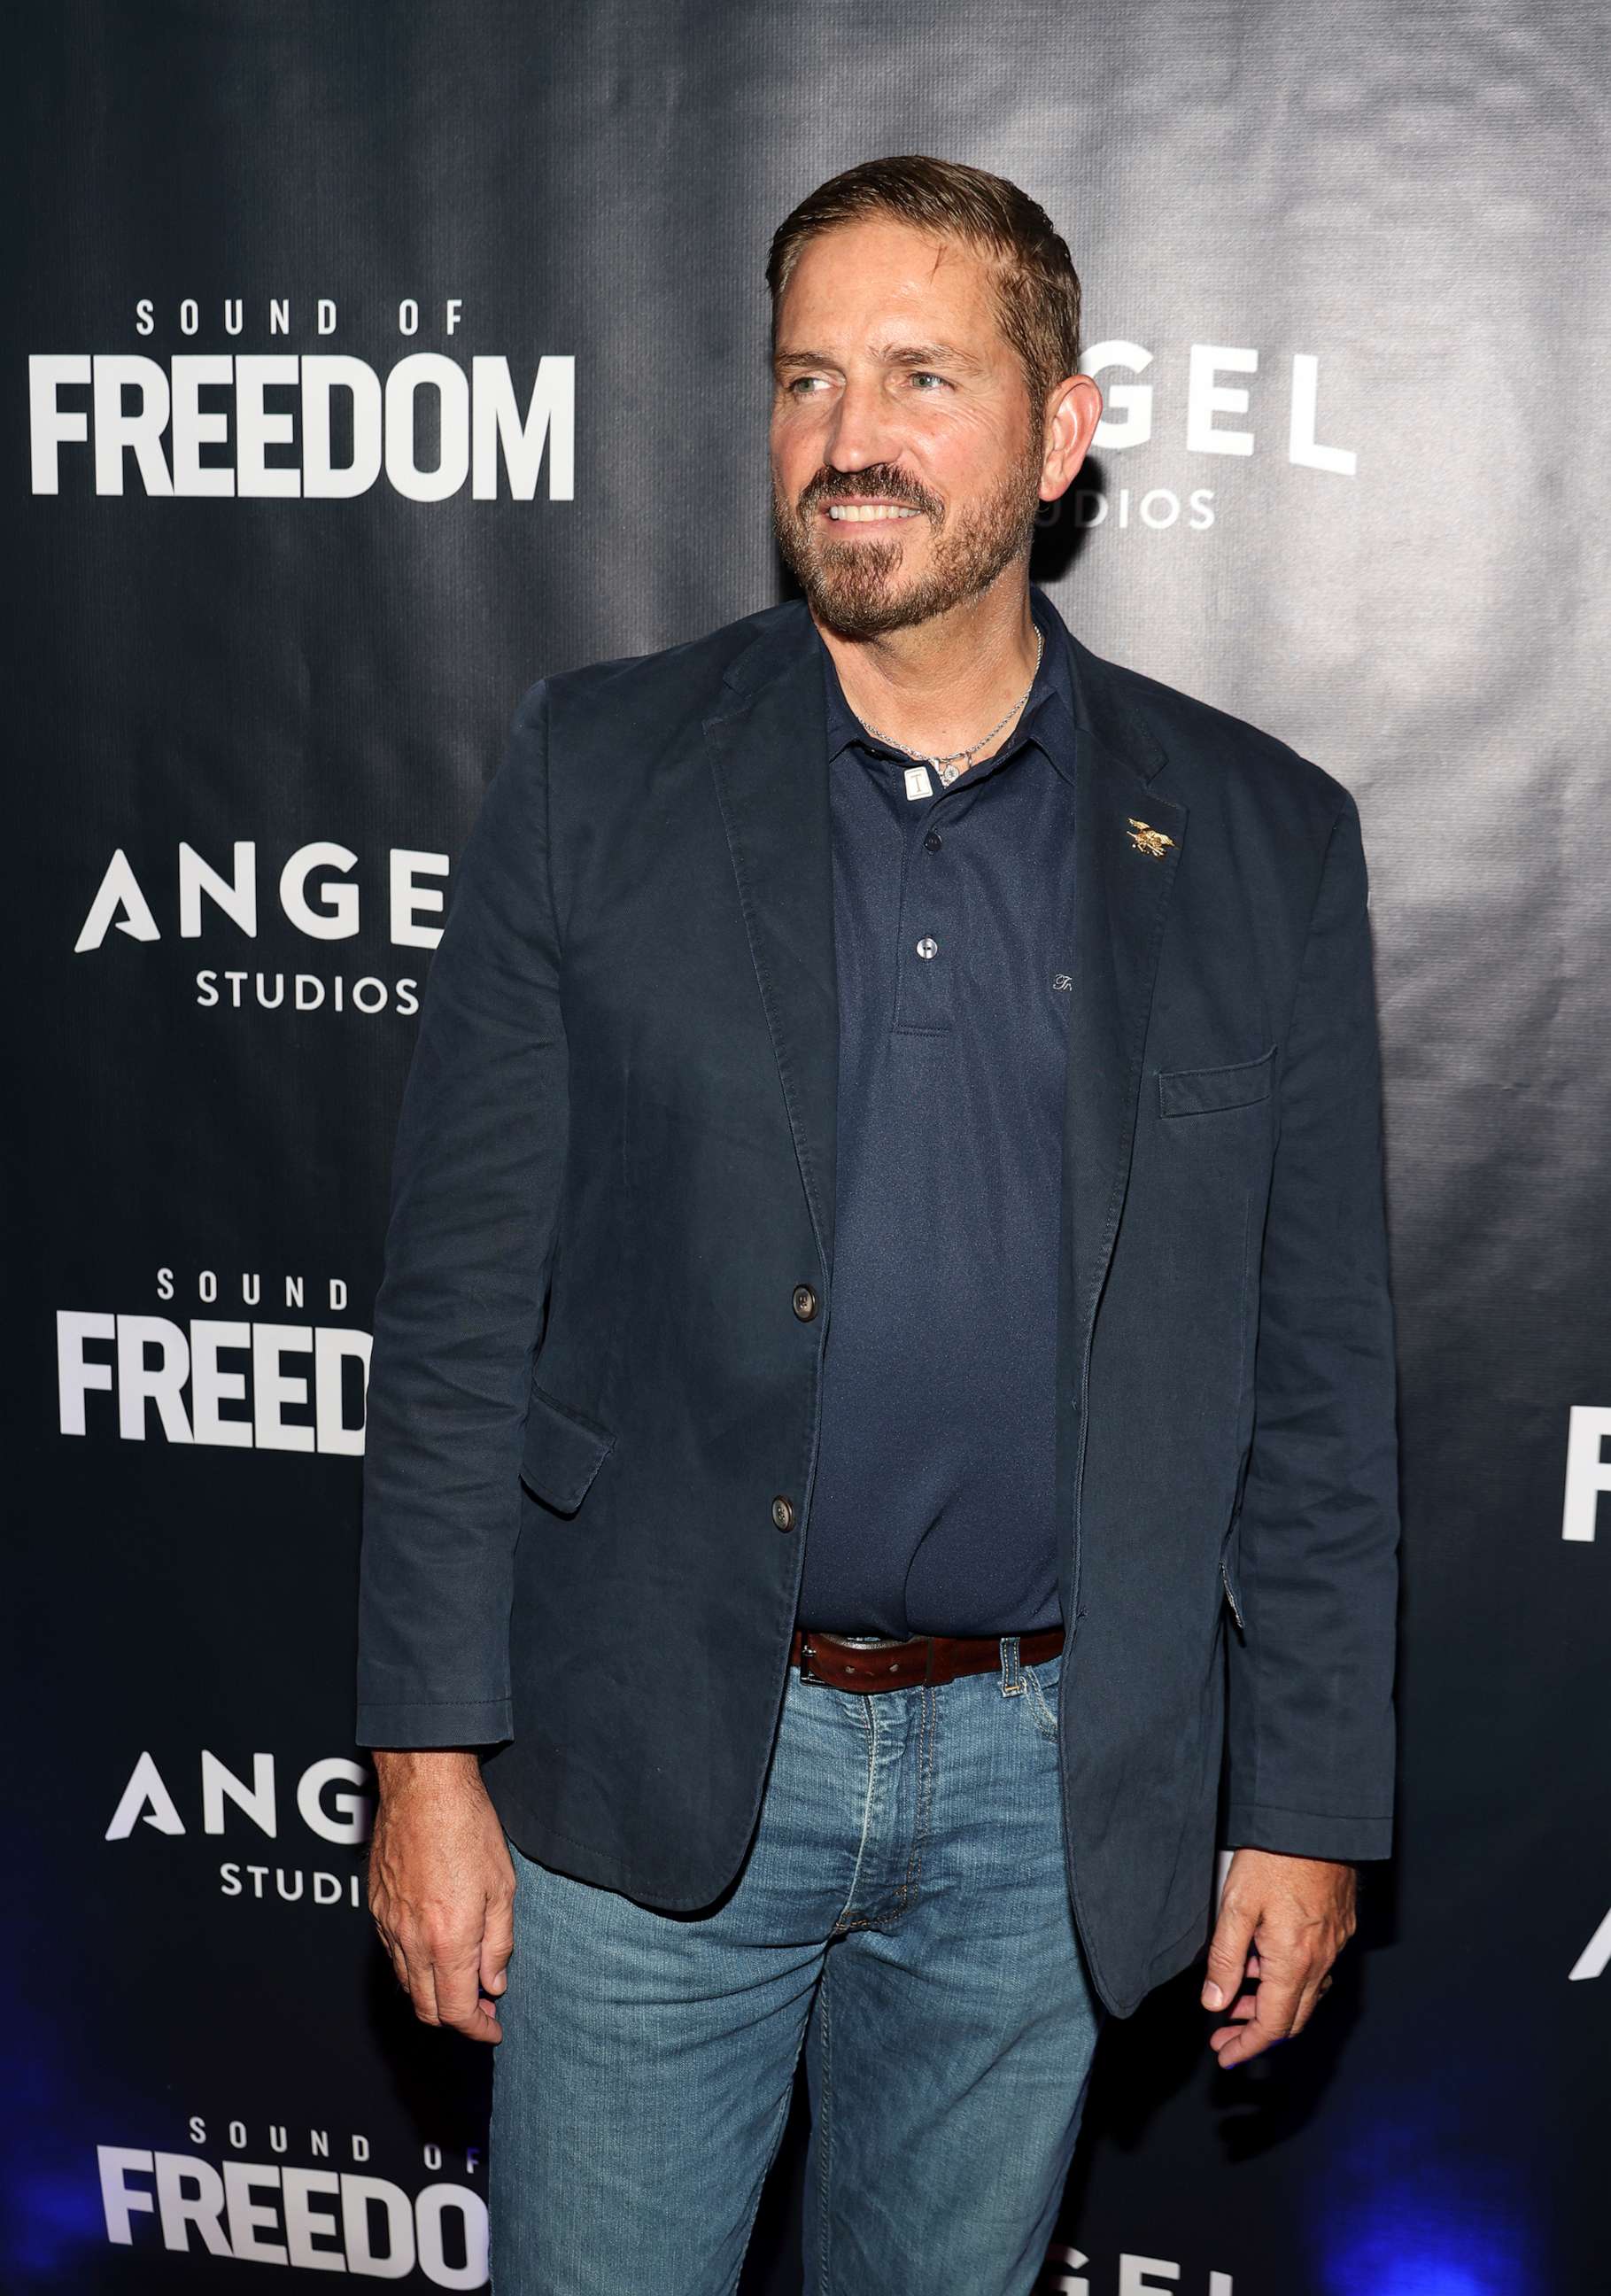 PHOTO: Actor Jim Caviezel is seen during the premiere of "Sound of Freedom," June 23, 2022, in Miami Beach, Fla.